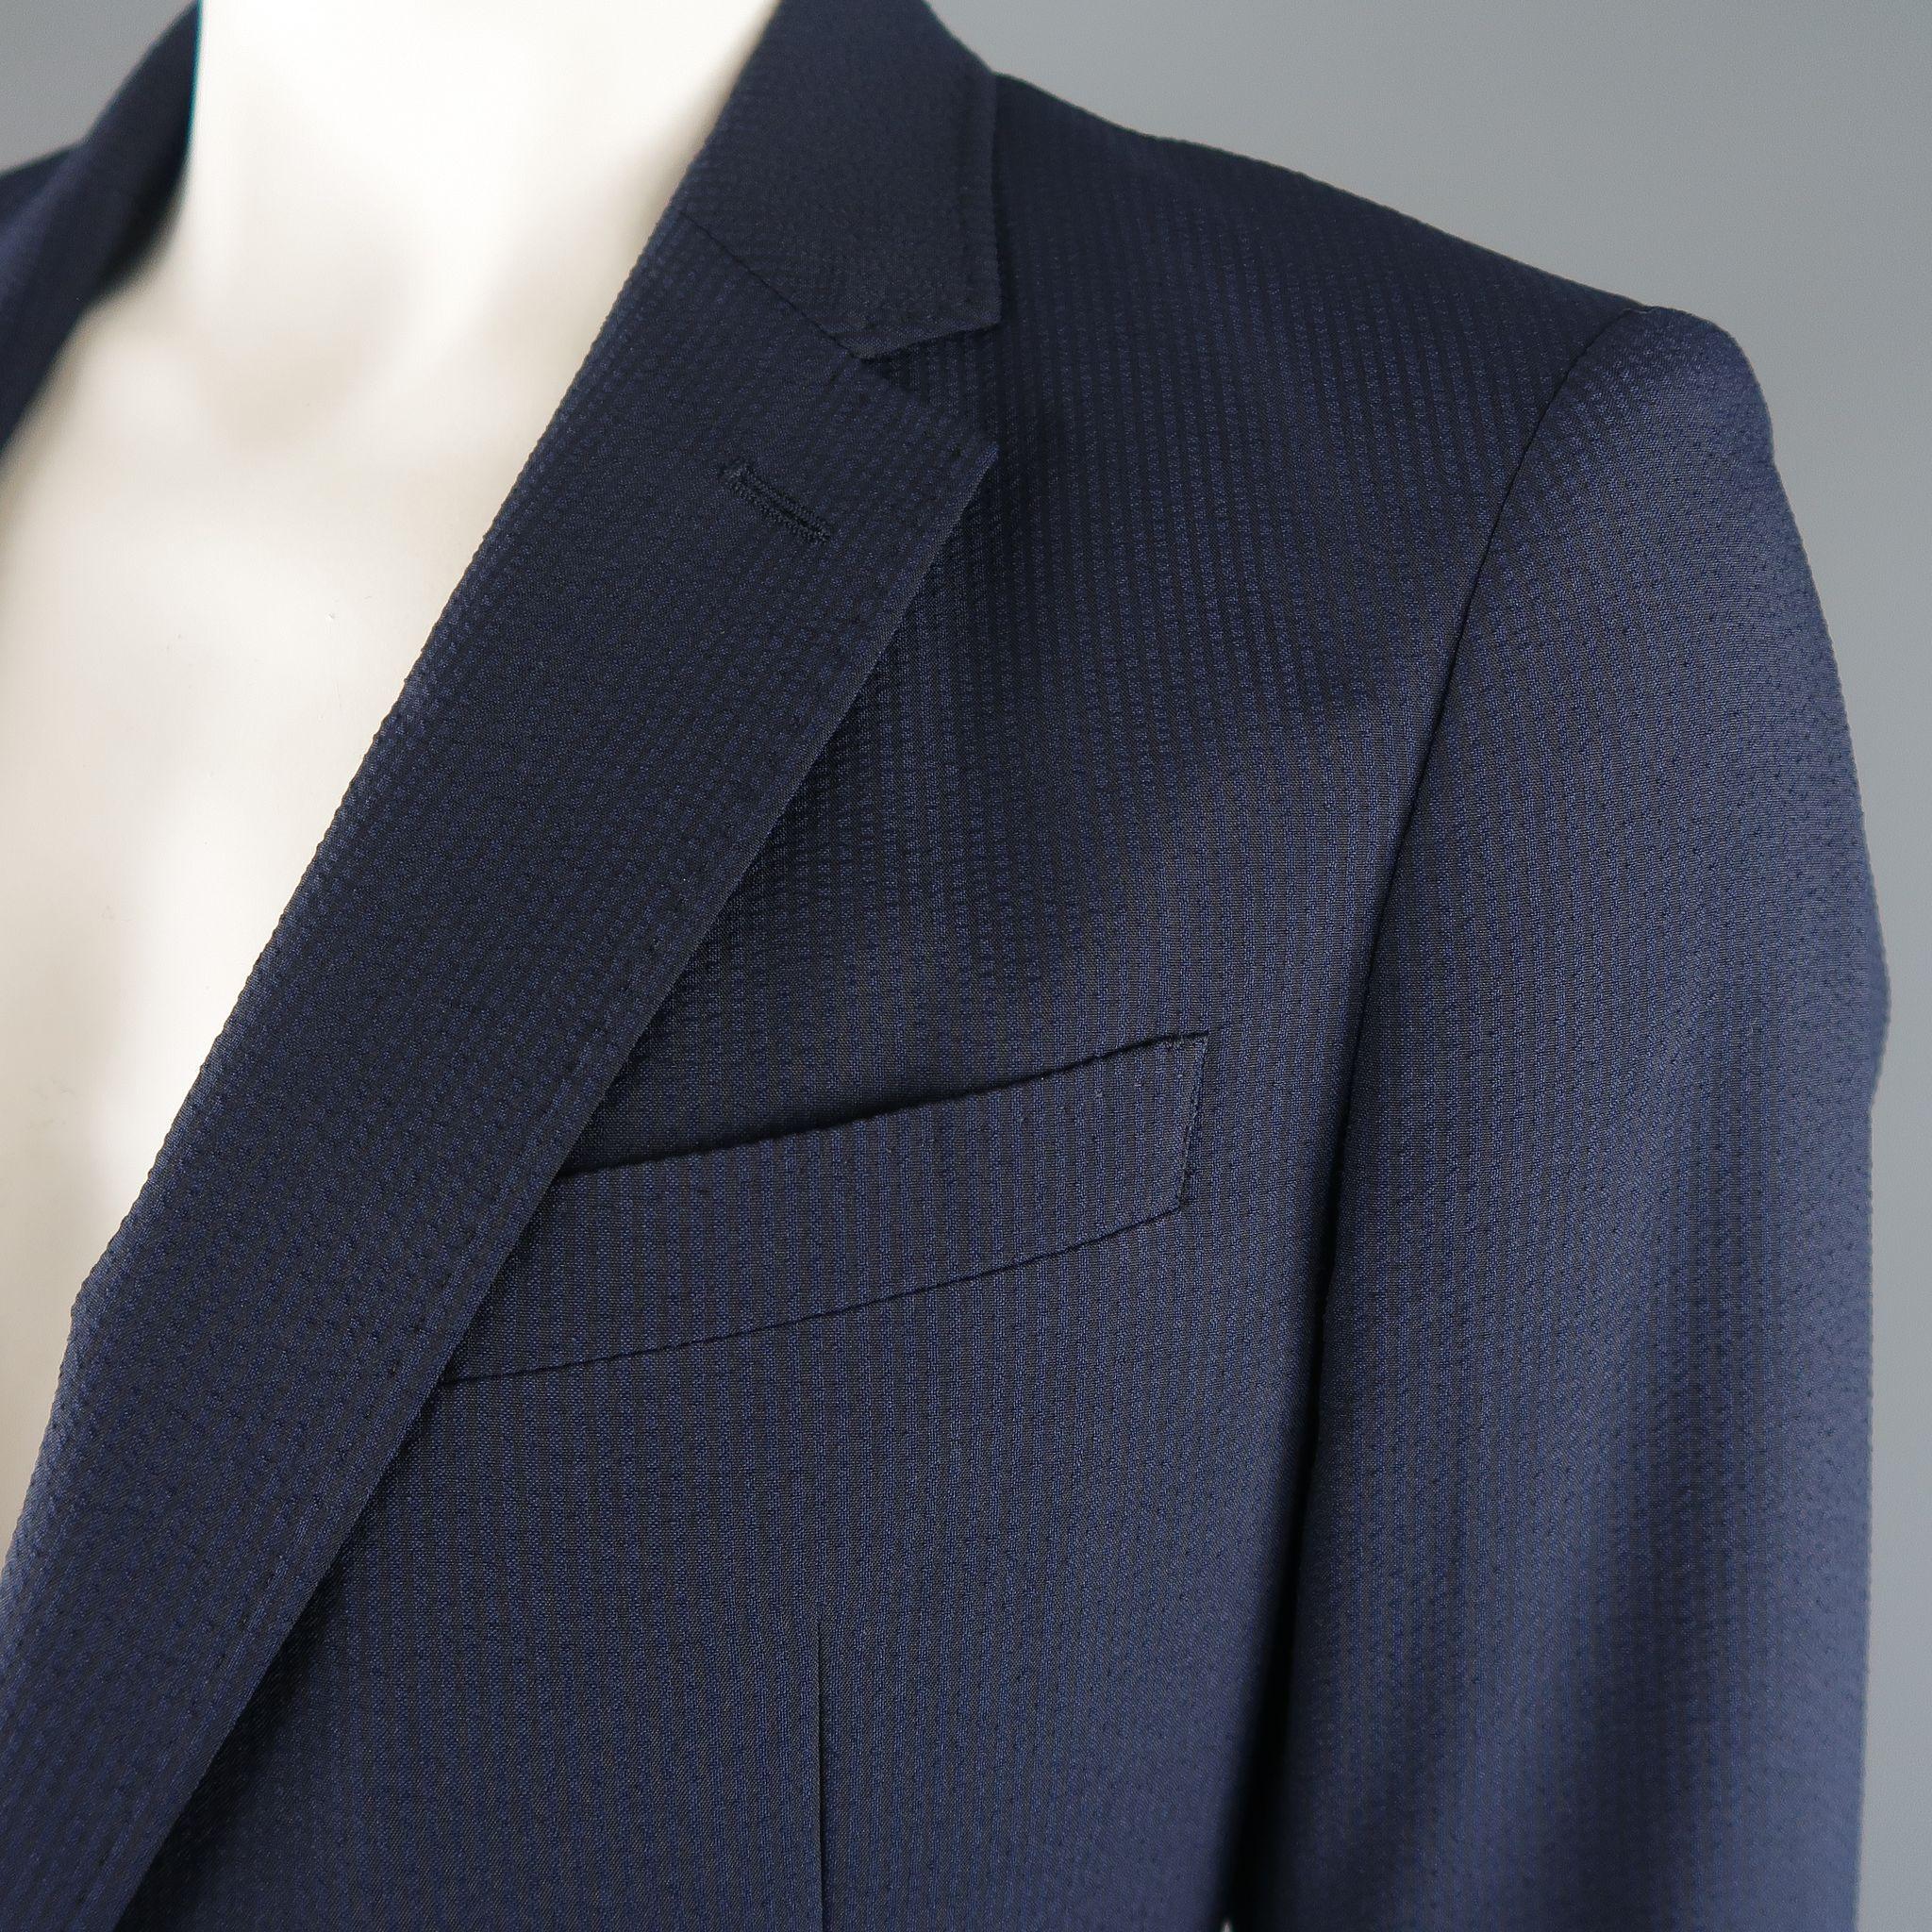 Single breasted ARMANI COLLEZIONI sport jacket comes in stripe textured fabric with a notch lapel, two button closure, and double vented back.

Excellent Pre-Owned Condition.
Marked: 44 R

Measurements:

l Shoulder: 18 in.
l Chest: 46 in.
l Sleeve: